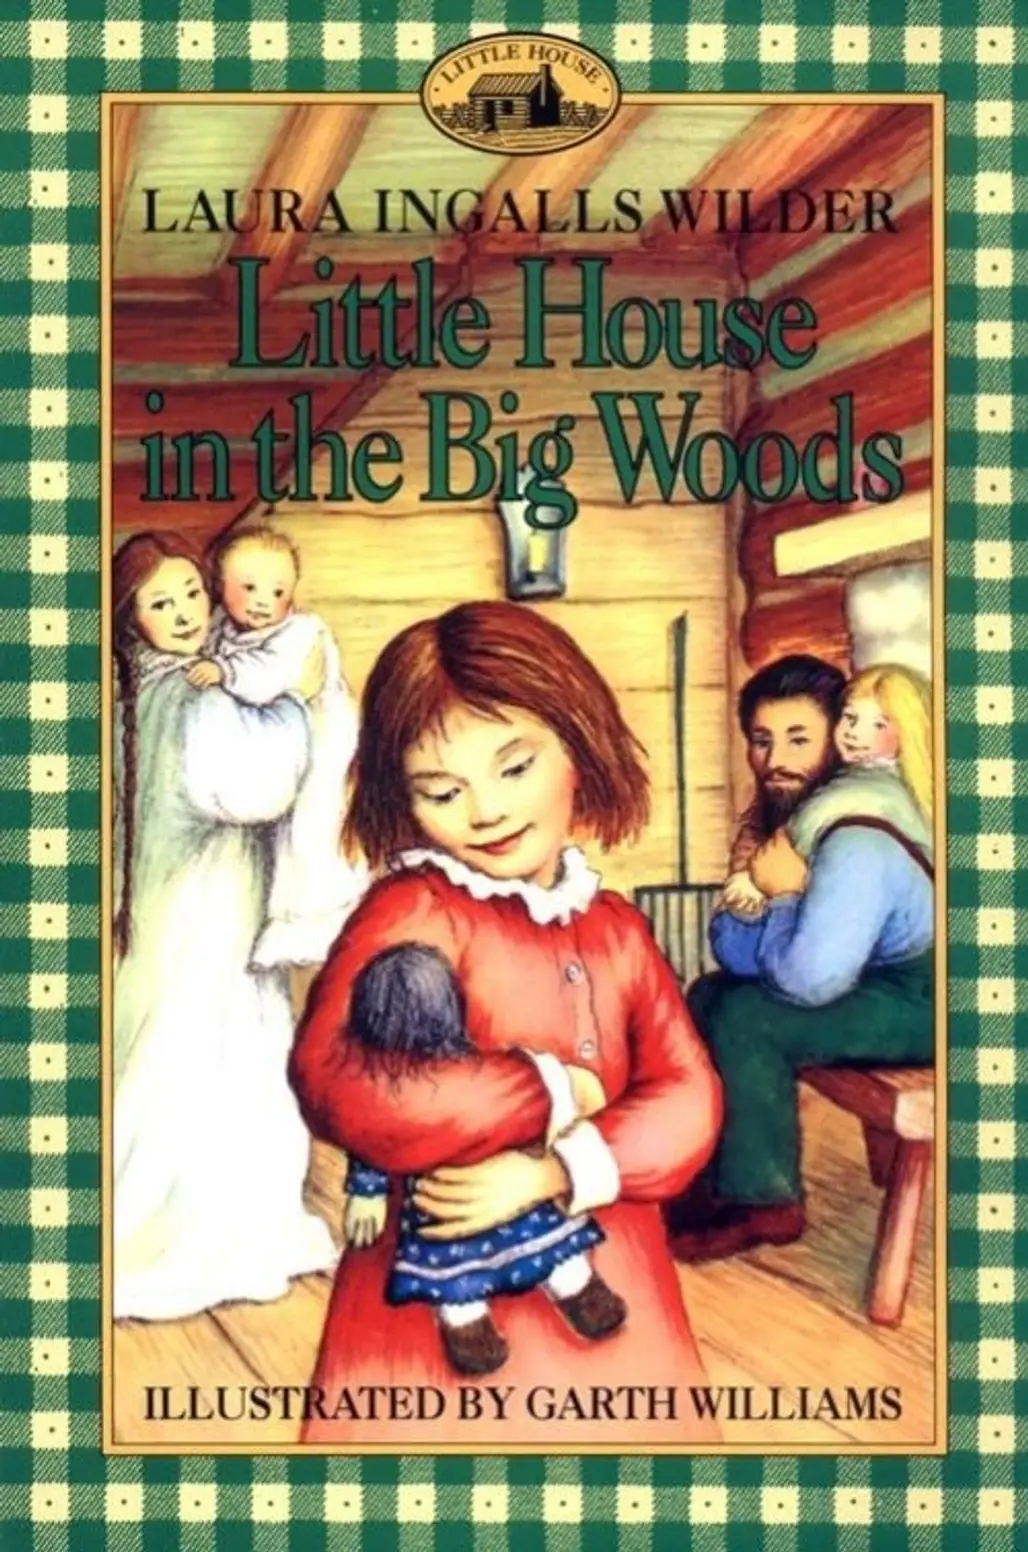 The Little House Books by Laura Ingalls Wilder